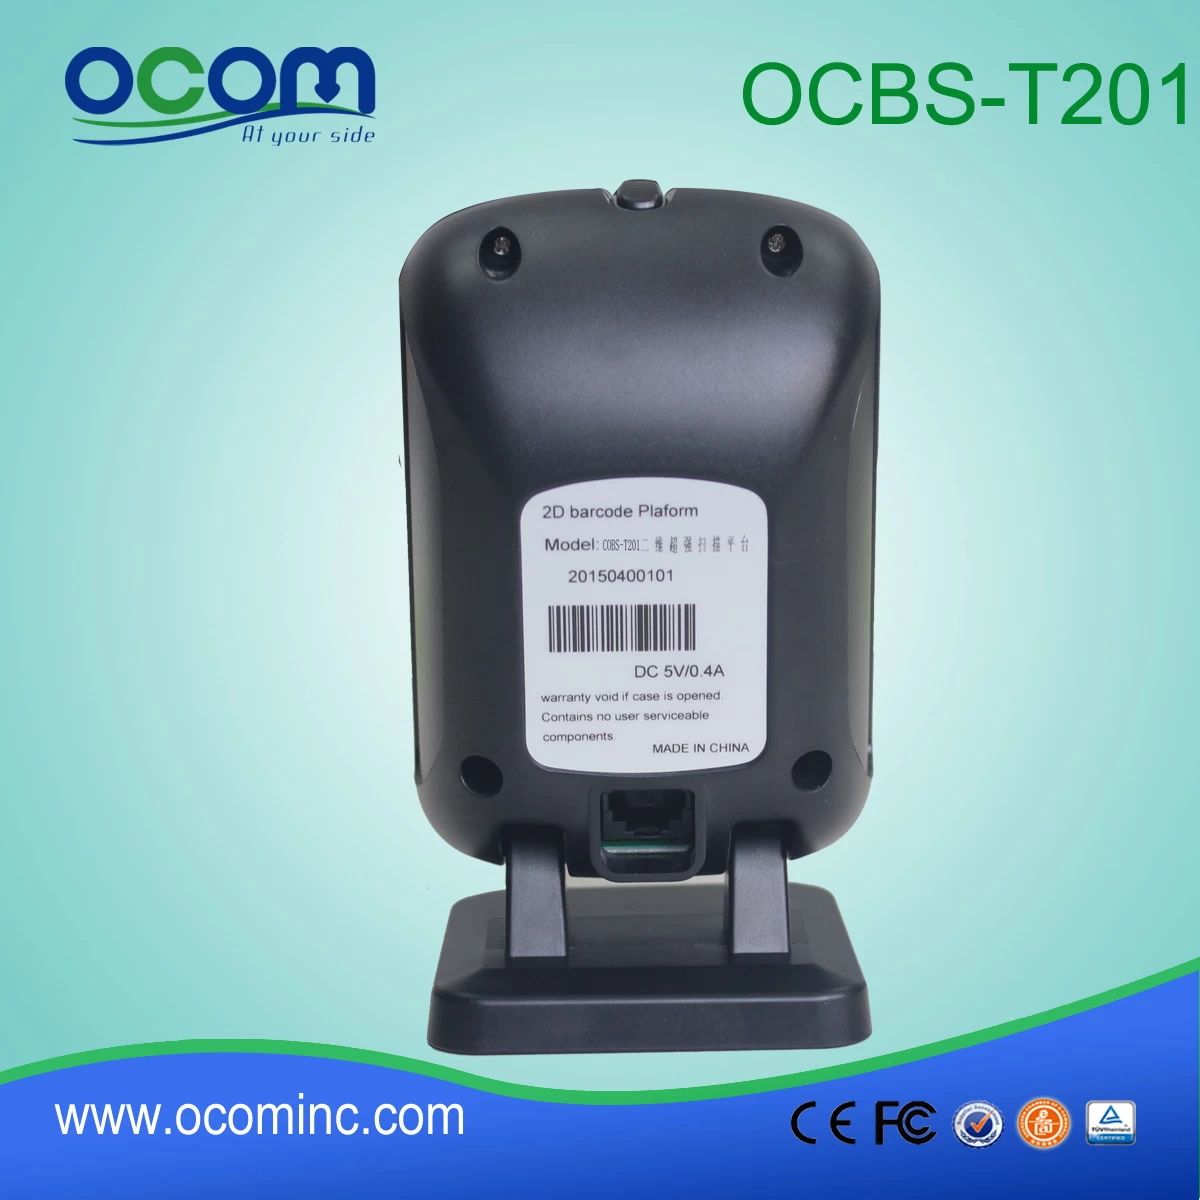 2d Barcode Scanner Module with steady stand  (OCBS-T201)